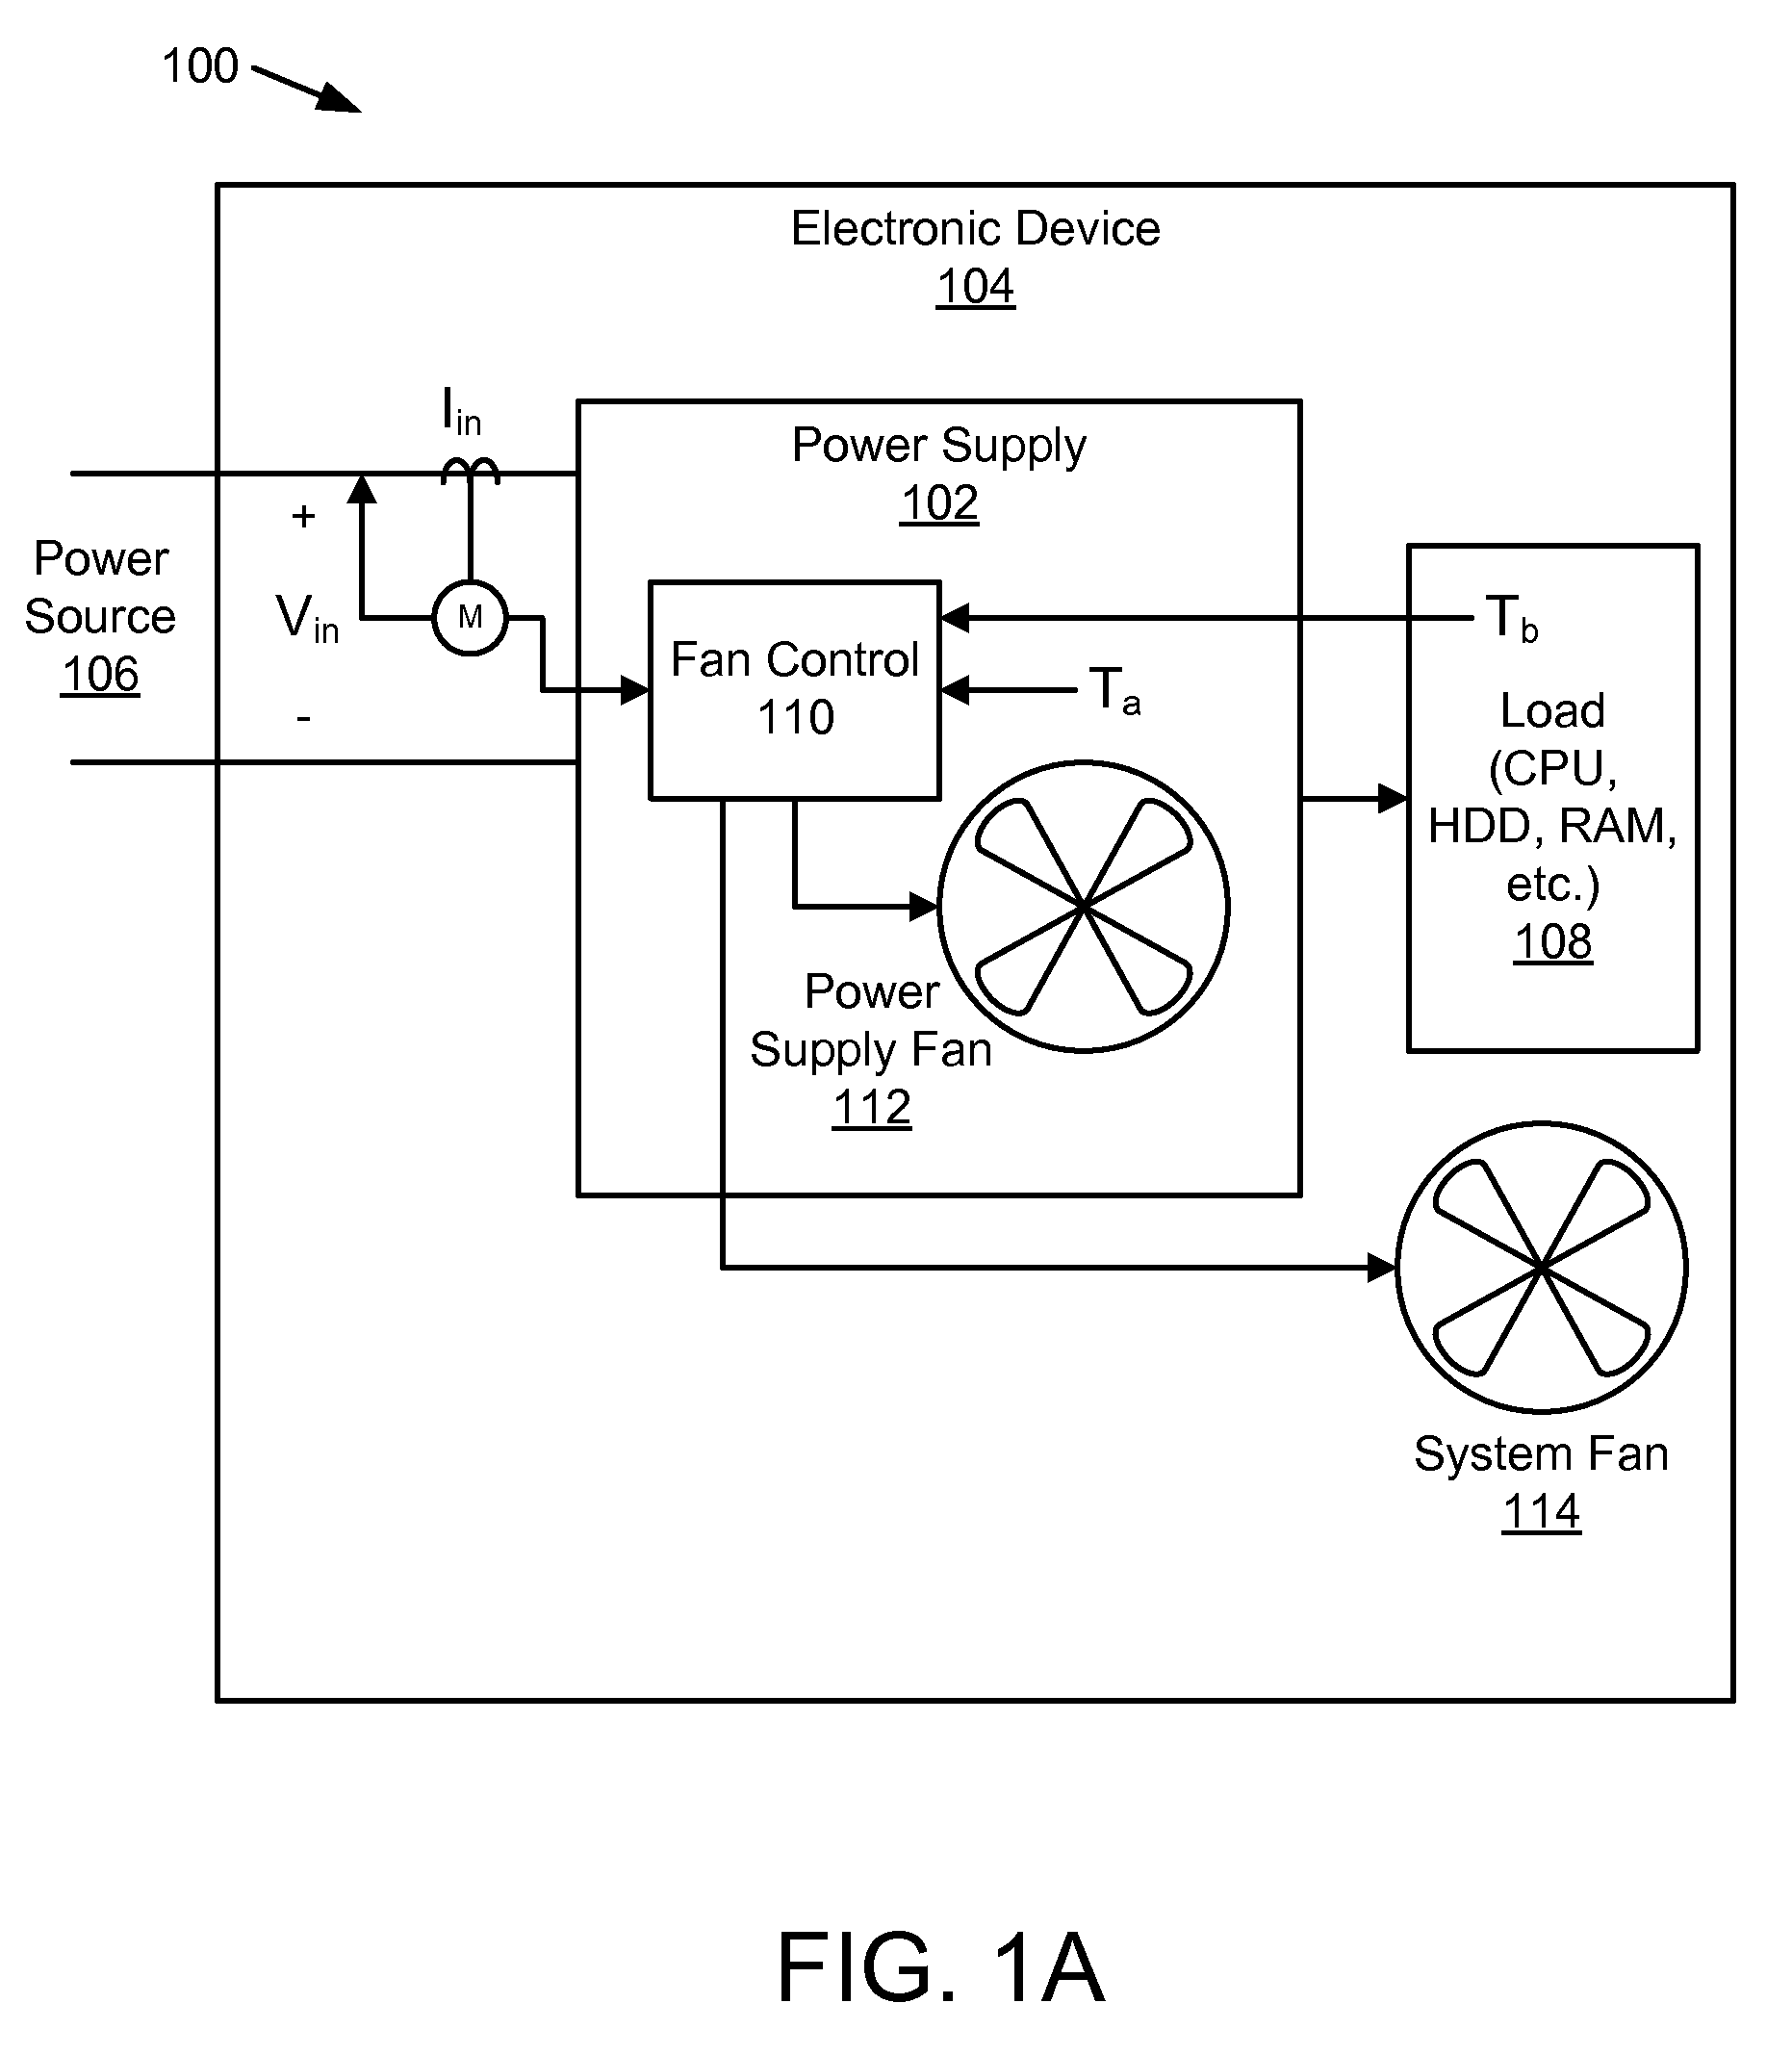 Apparatus, system, and method for controlling speed of a cooling fan